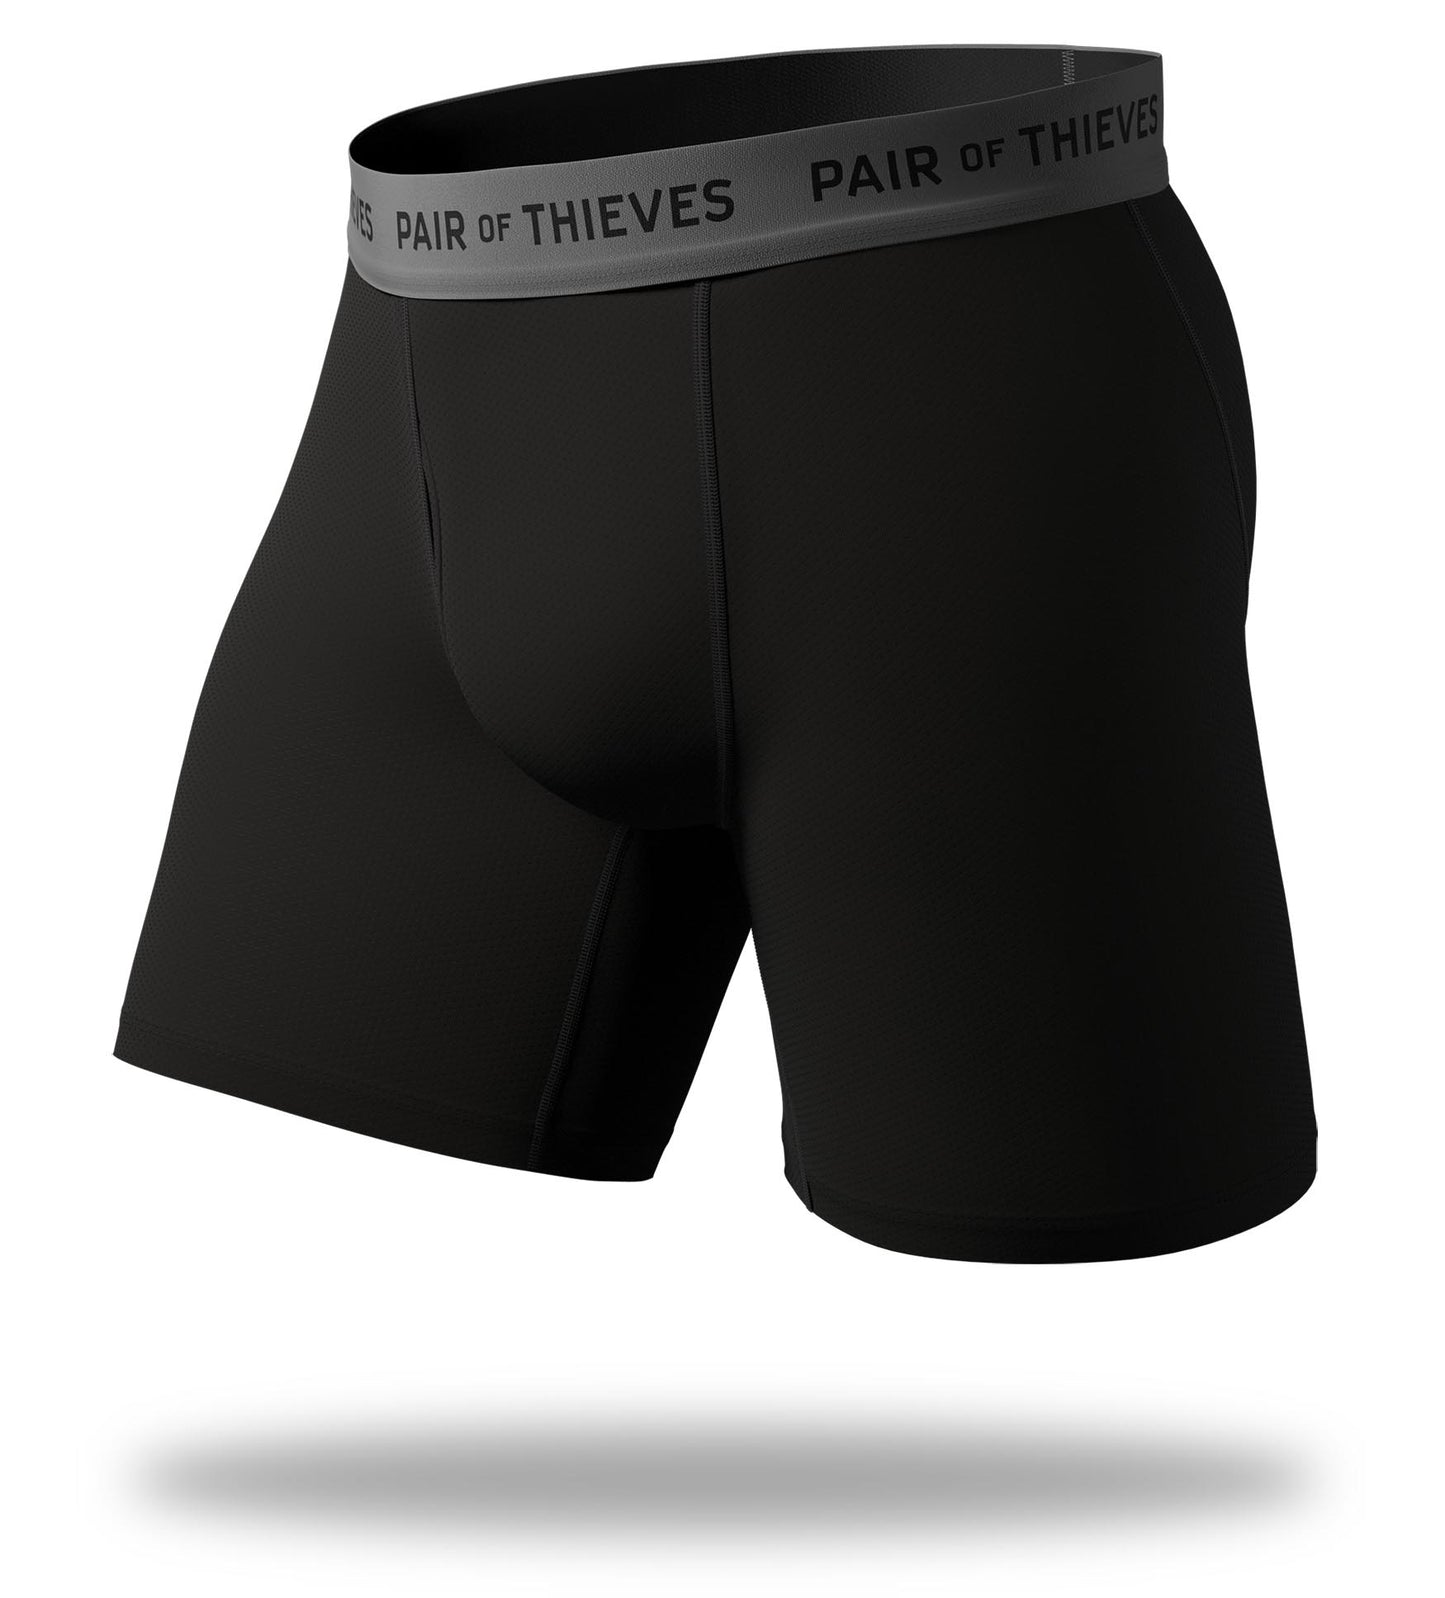 superfit black long boxer brief, black with black logo on grey waistband